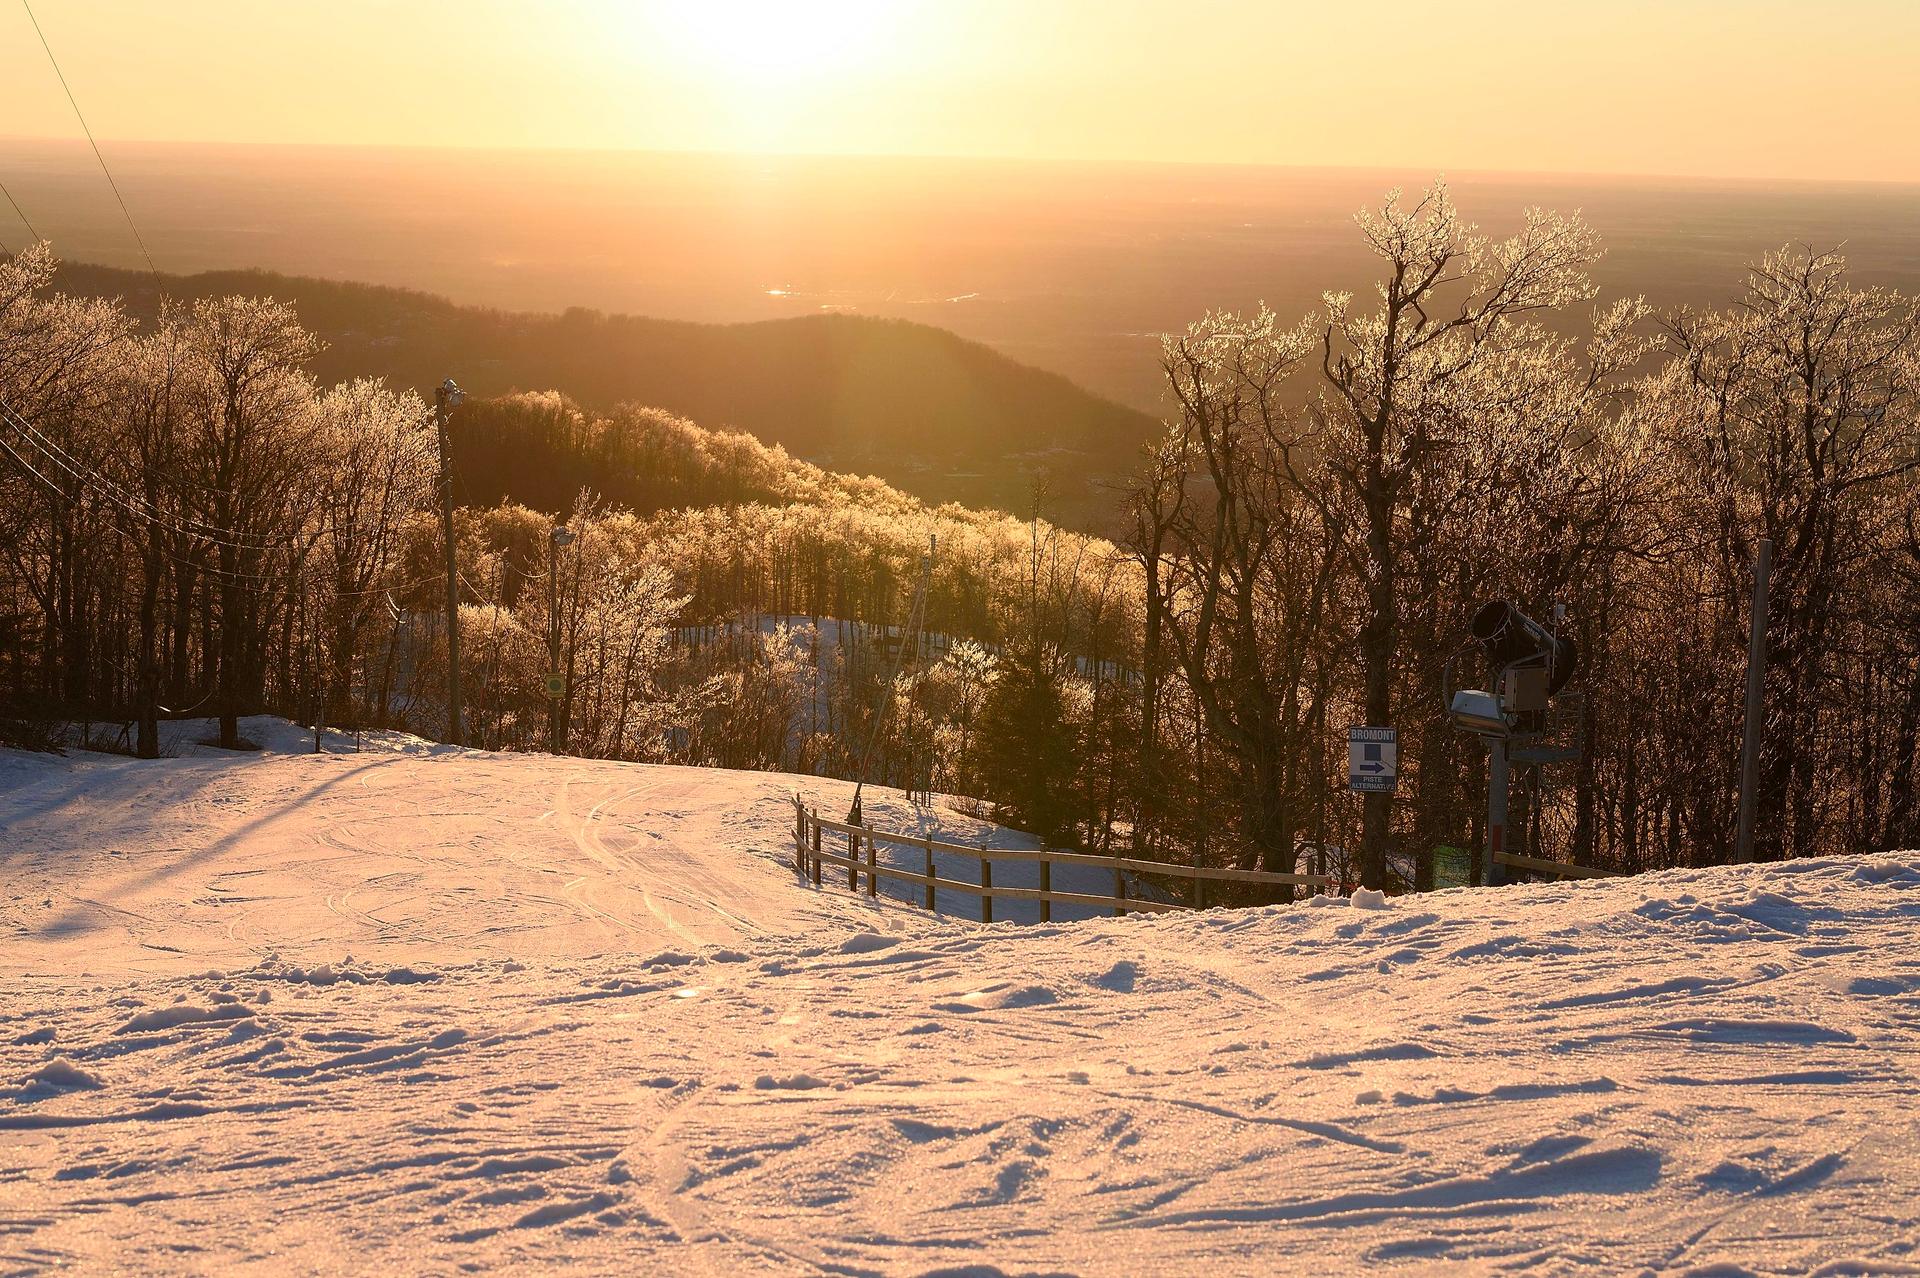 Bromont, located in the Eastern Townships, is a ski resort Maxime Dufour-Lapointe has been rediscovering.